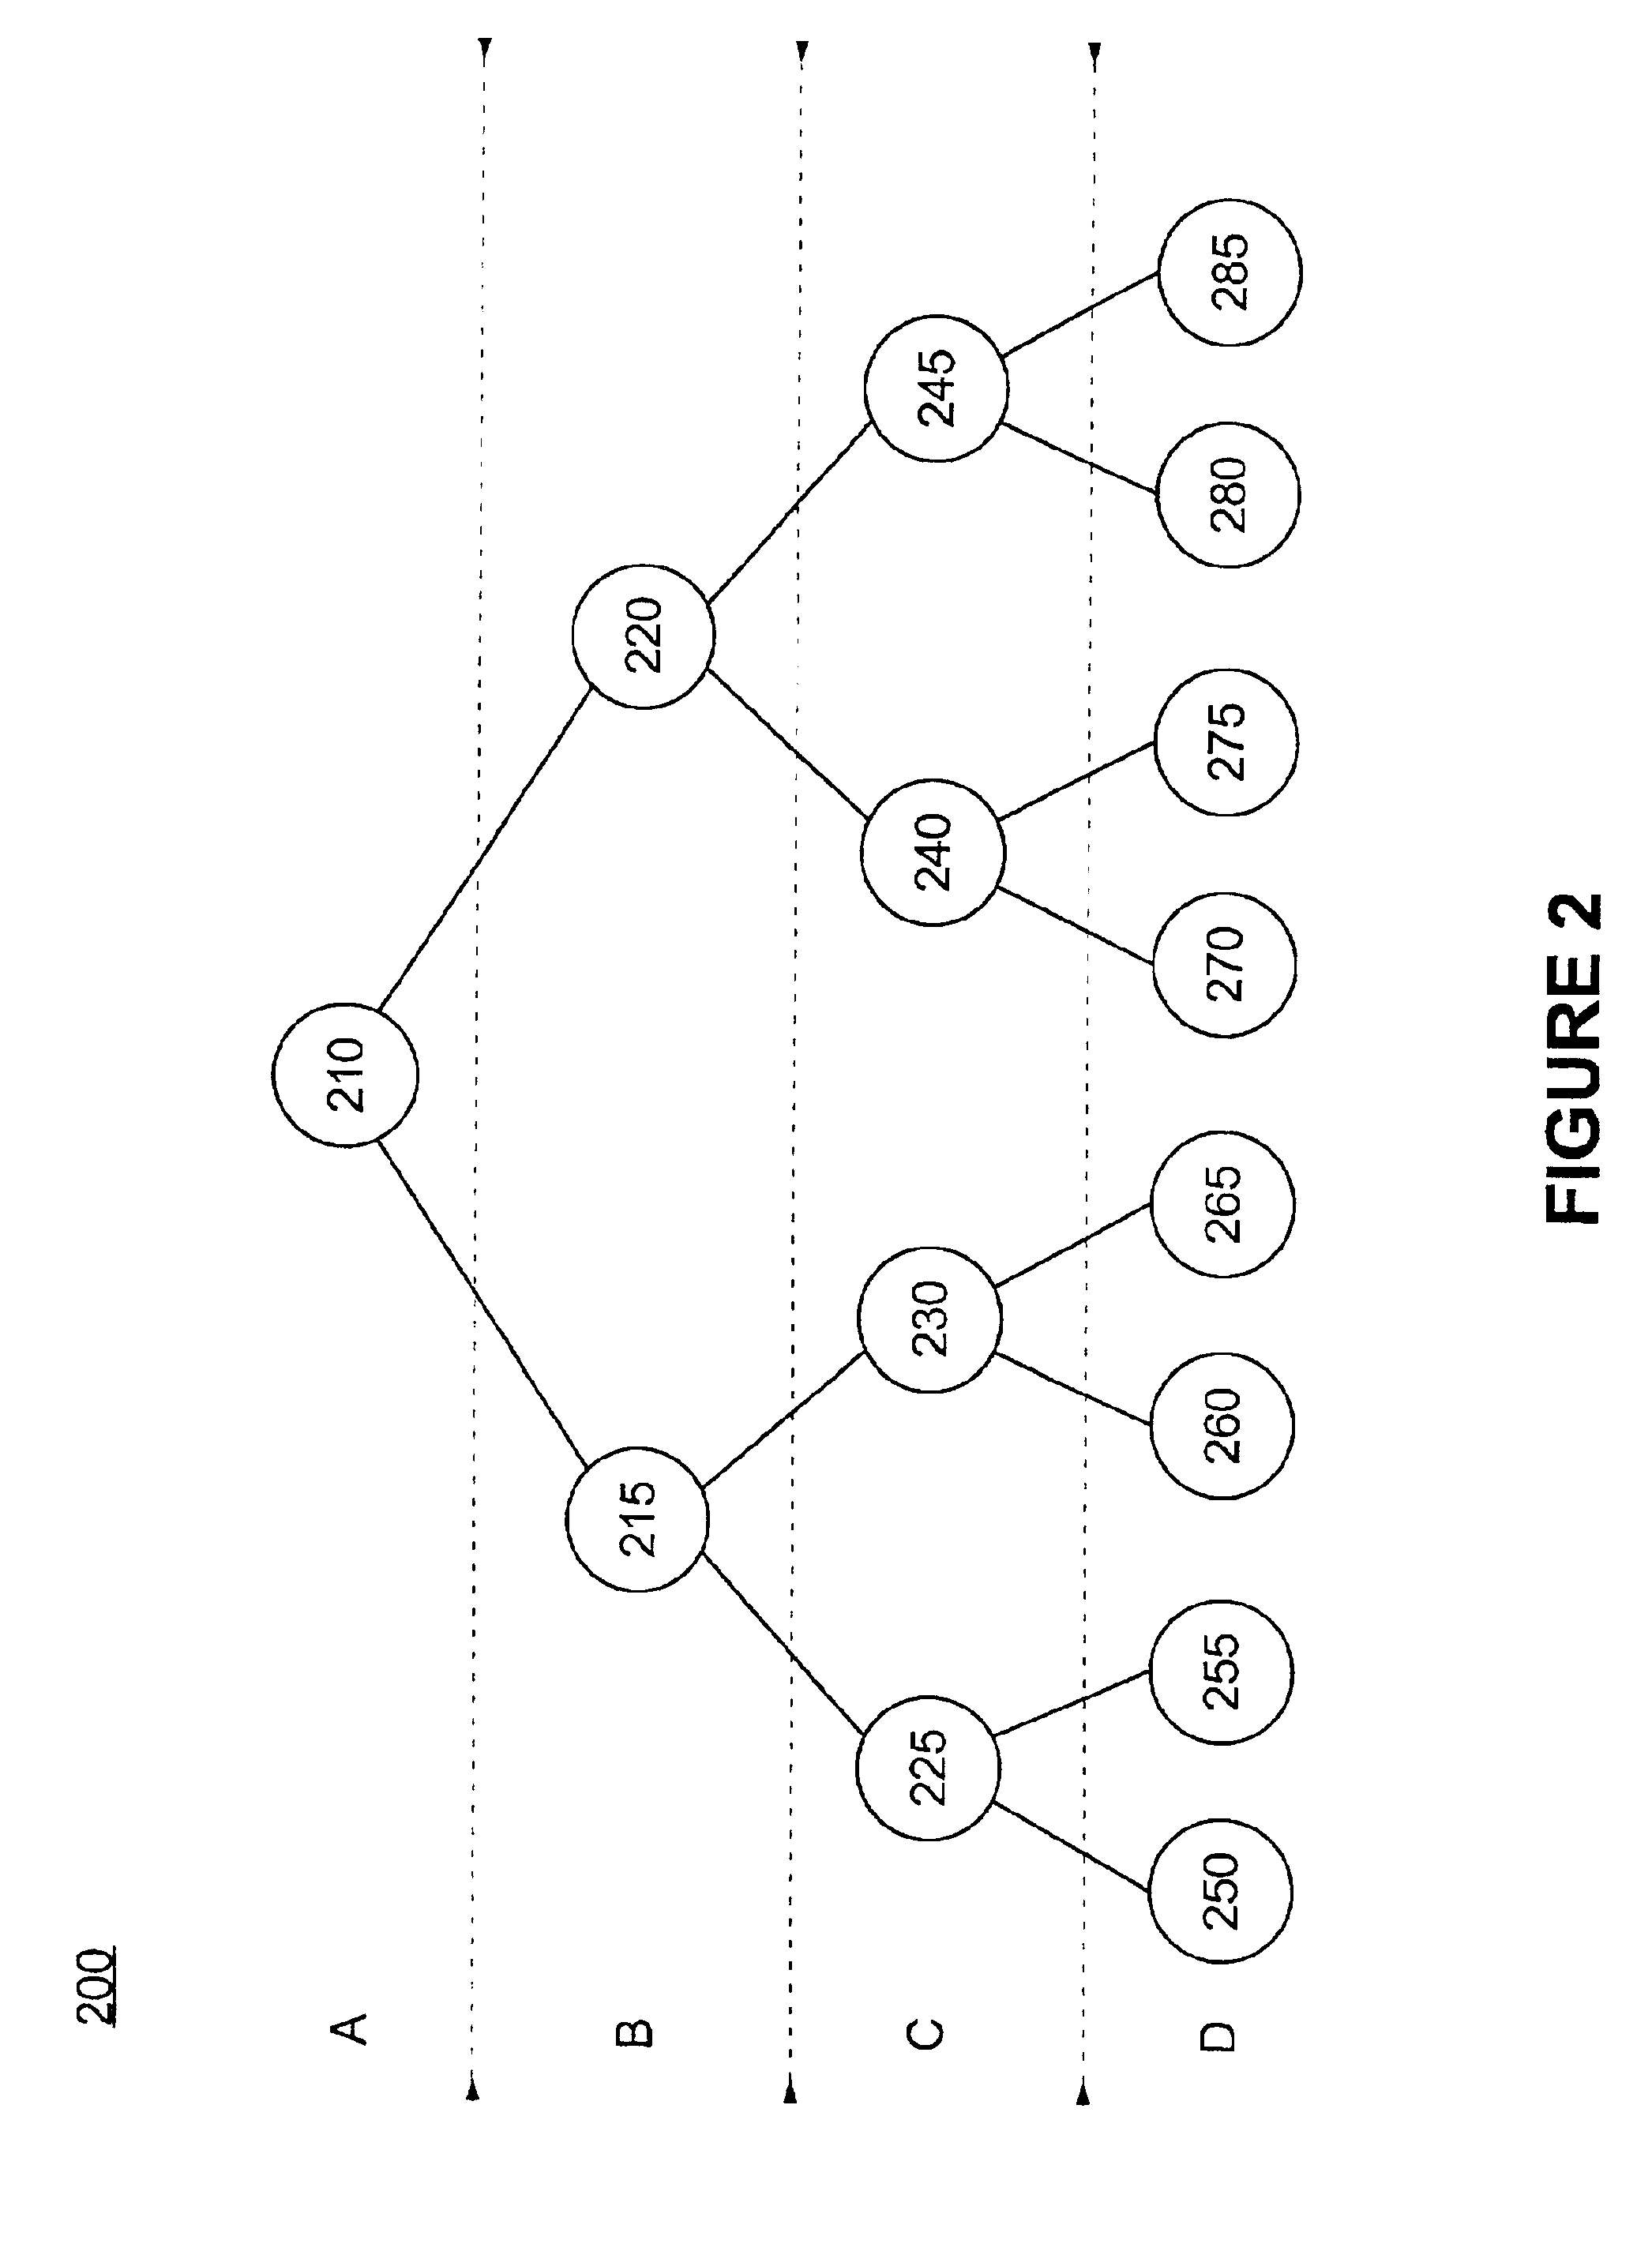 Method of tuning a decision network and a decision tree model